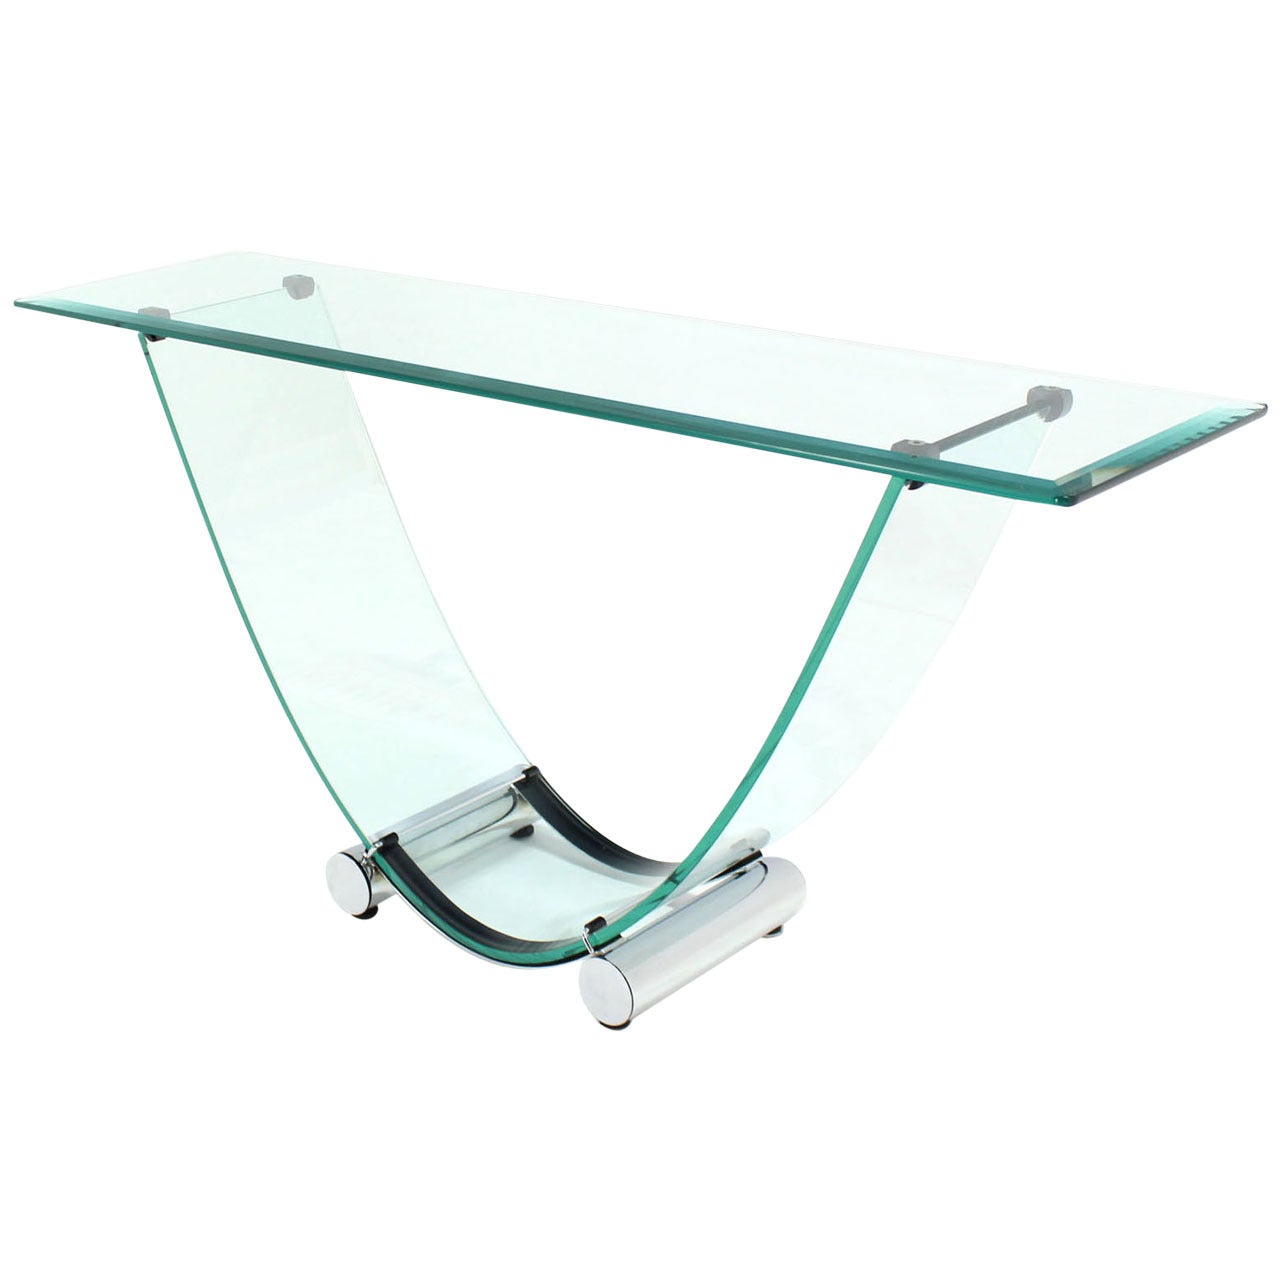 U-Shape Bent Glass Console or Sofa Table with Glass Top